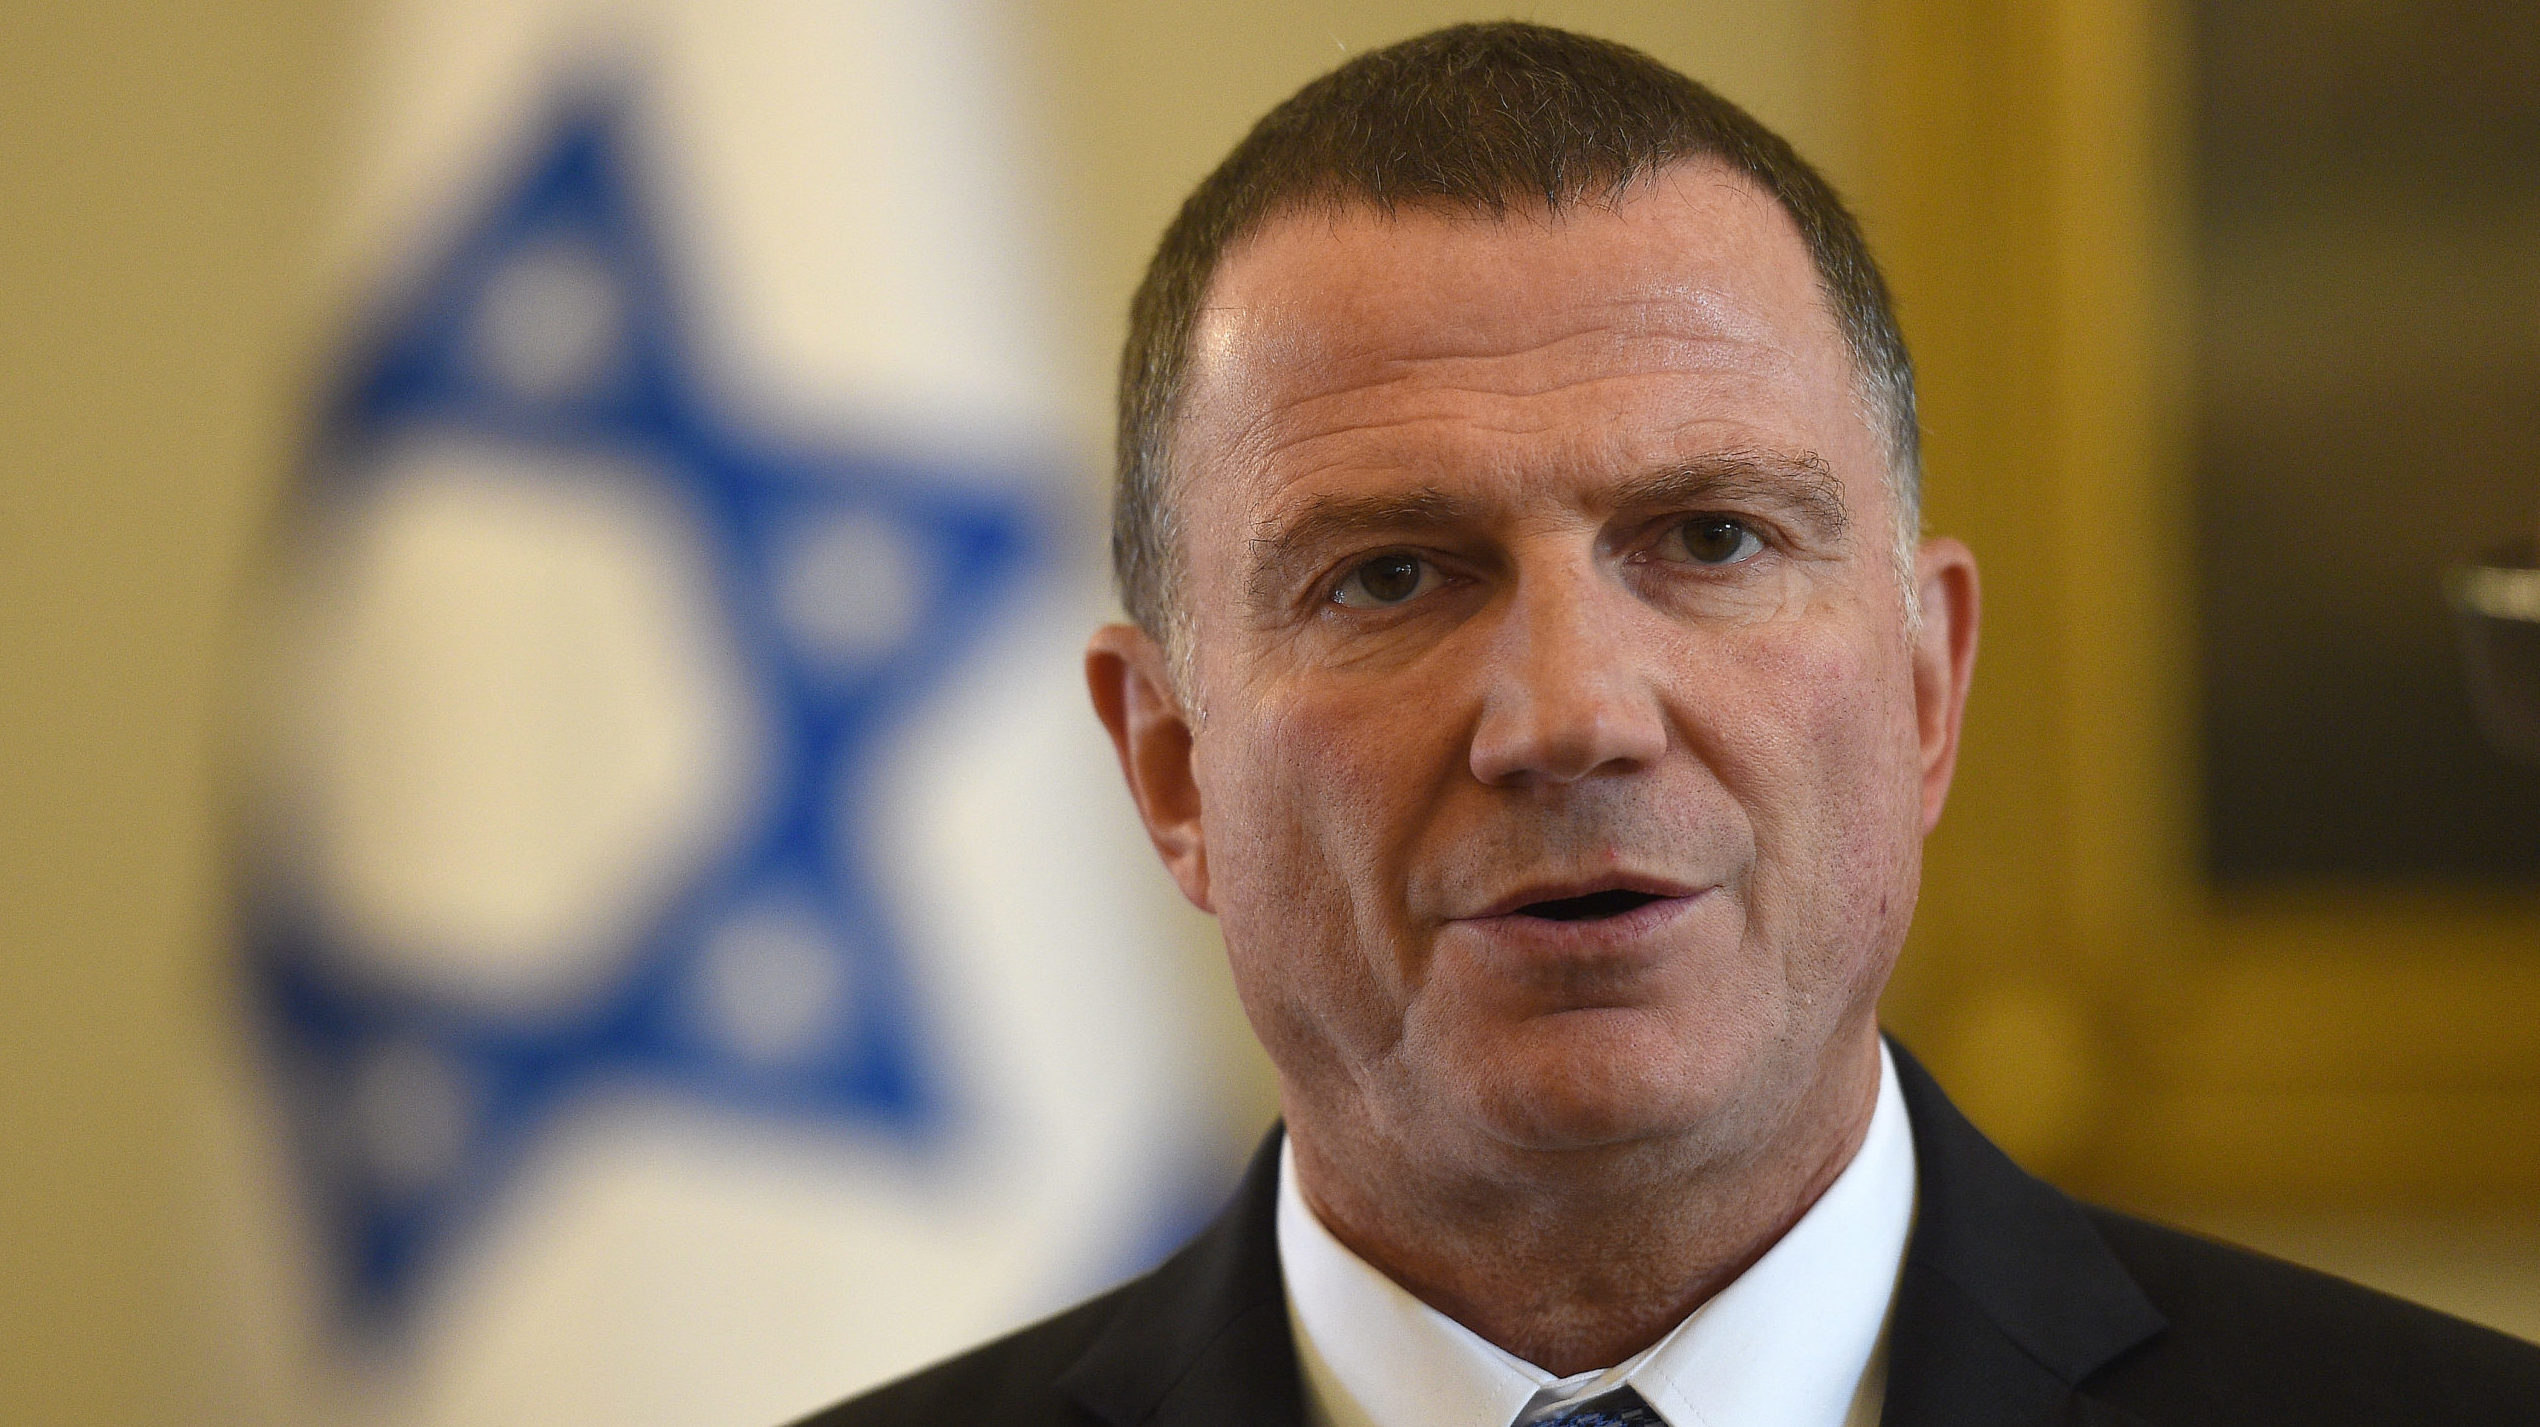 Likud’s Edelstein Punished for Being No-Show for Knesset Votes